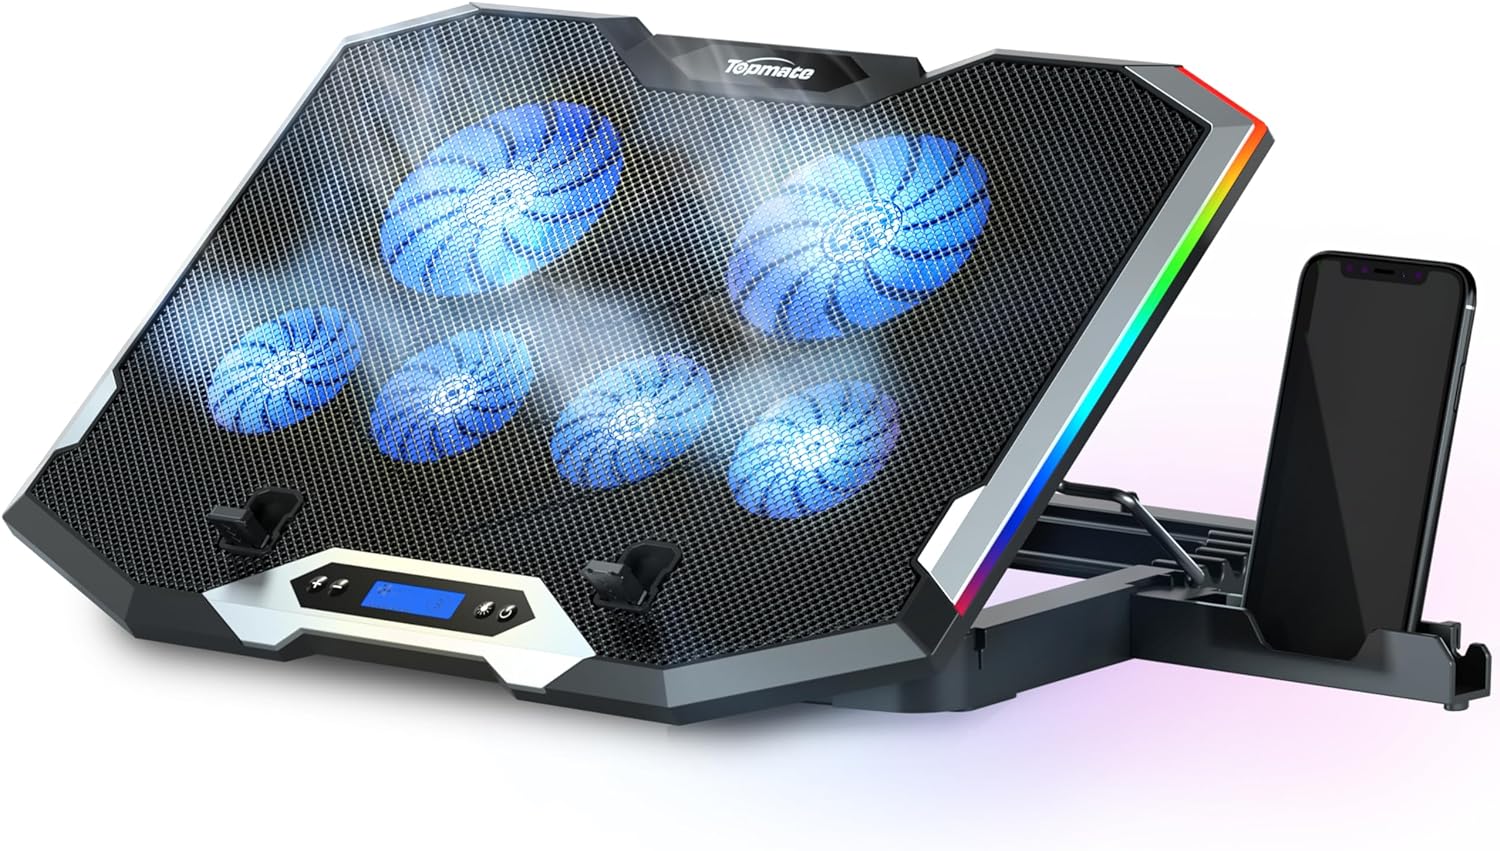 TopMate C11 Laptop Cooling Pad RGB Gaming Notebook Cooler | Laptop Fan Stand Adjustable Height with 6 Quiet Fans and Phone Holder | Computer Chill Mat | for 15.6-17.3 Inch Laptops - Blue LED Light